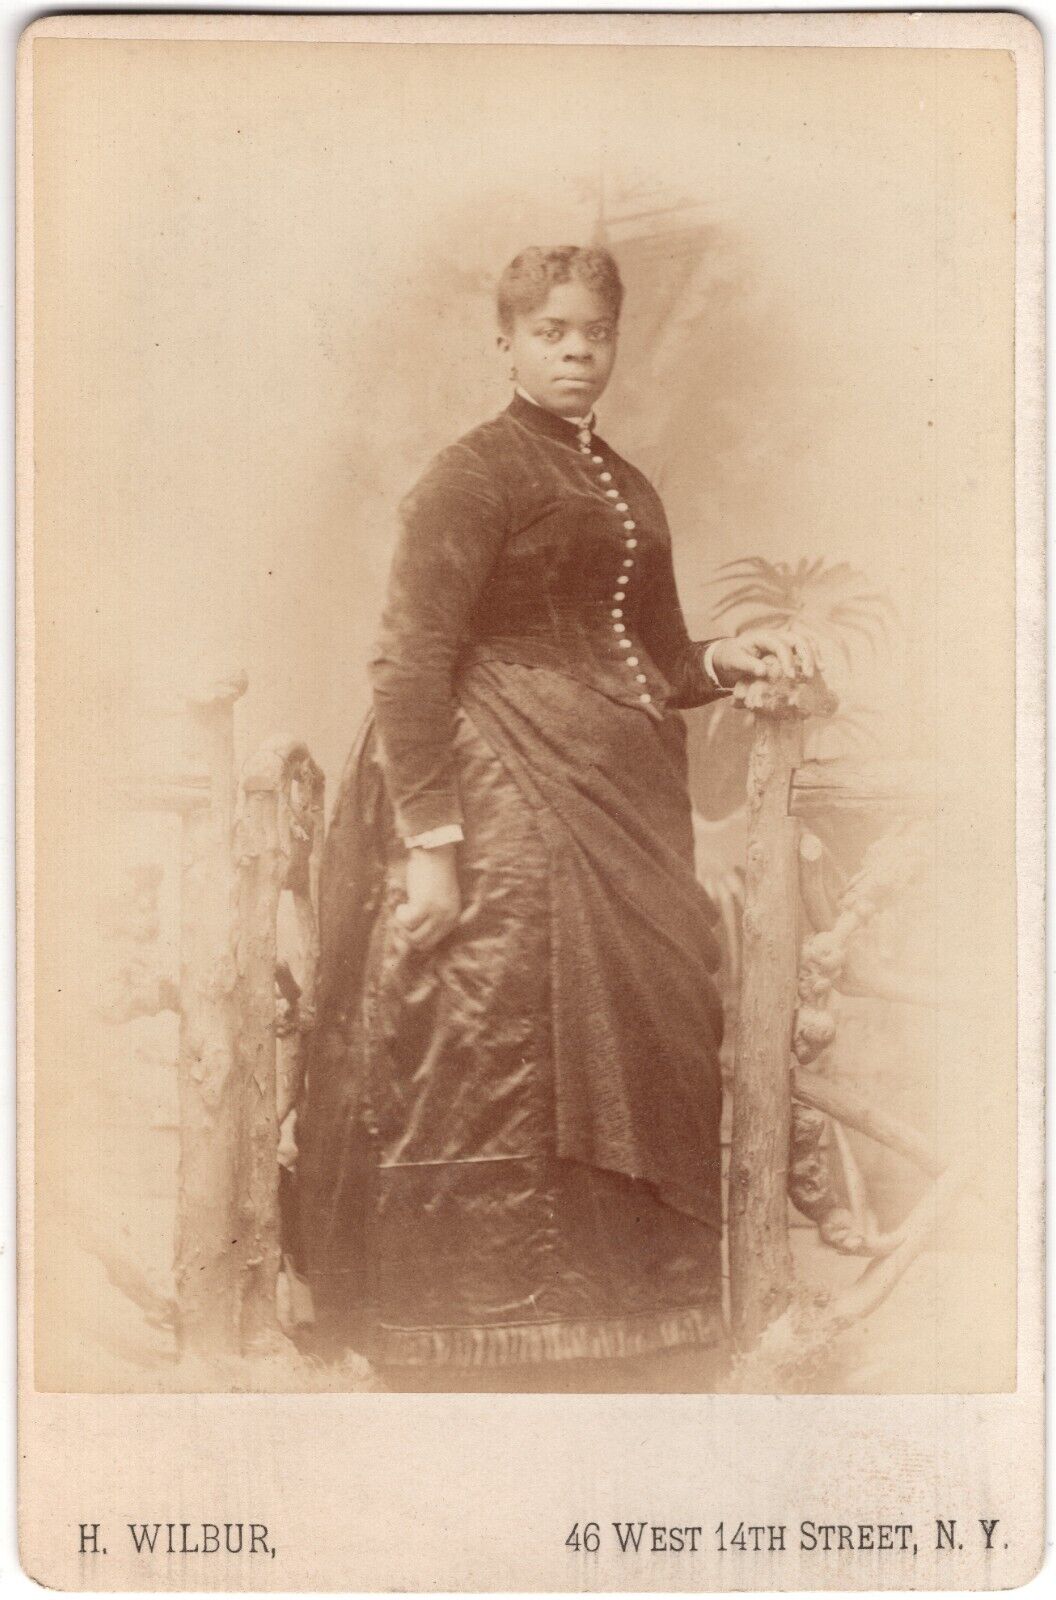 CIRCA 1880s CABINET CARD H. WILBUR YOUNG AFRICAN AMERICAN LADY IN DRESS NEW YORK